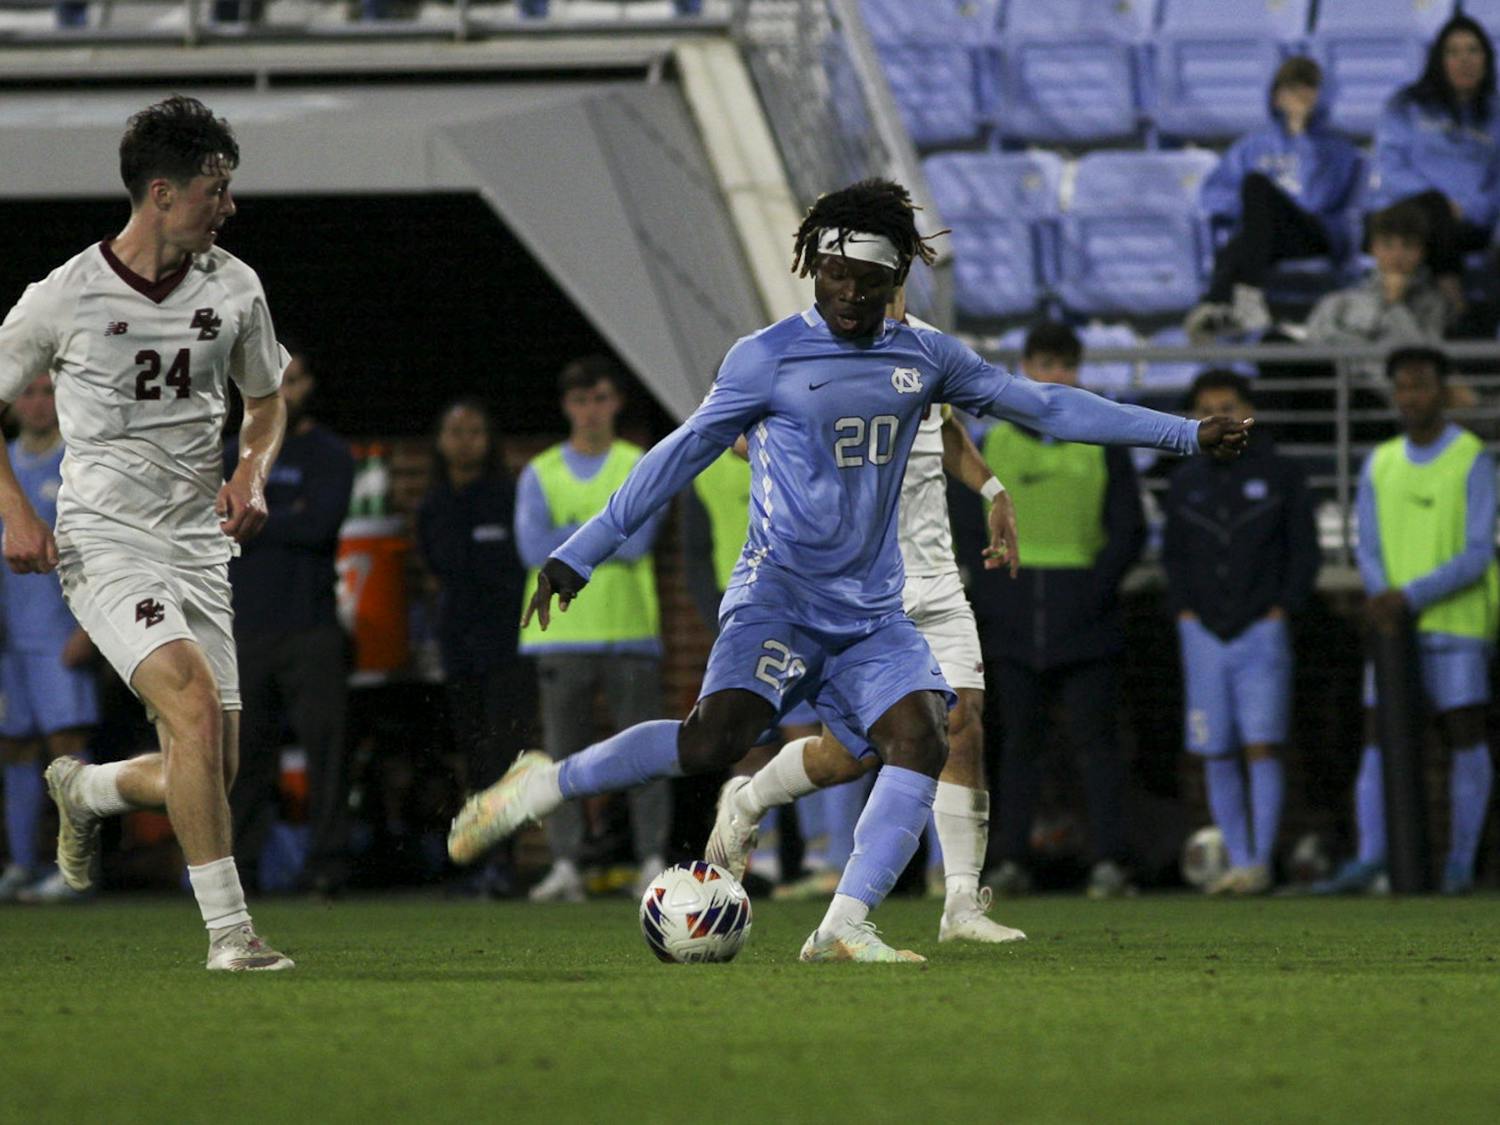 UNC junior midfielder/forward Ernest Bawa (20) kicks the ball during the game against Boston College at Dorrance Field on Wednesday, Nov. 2, 2022. UNC beat Boston College 1-0.